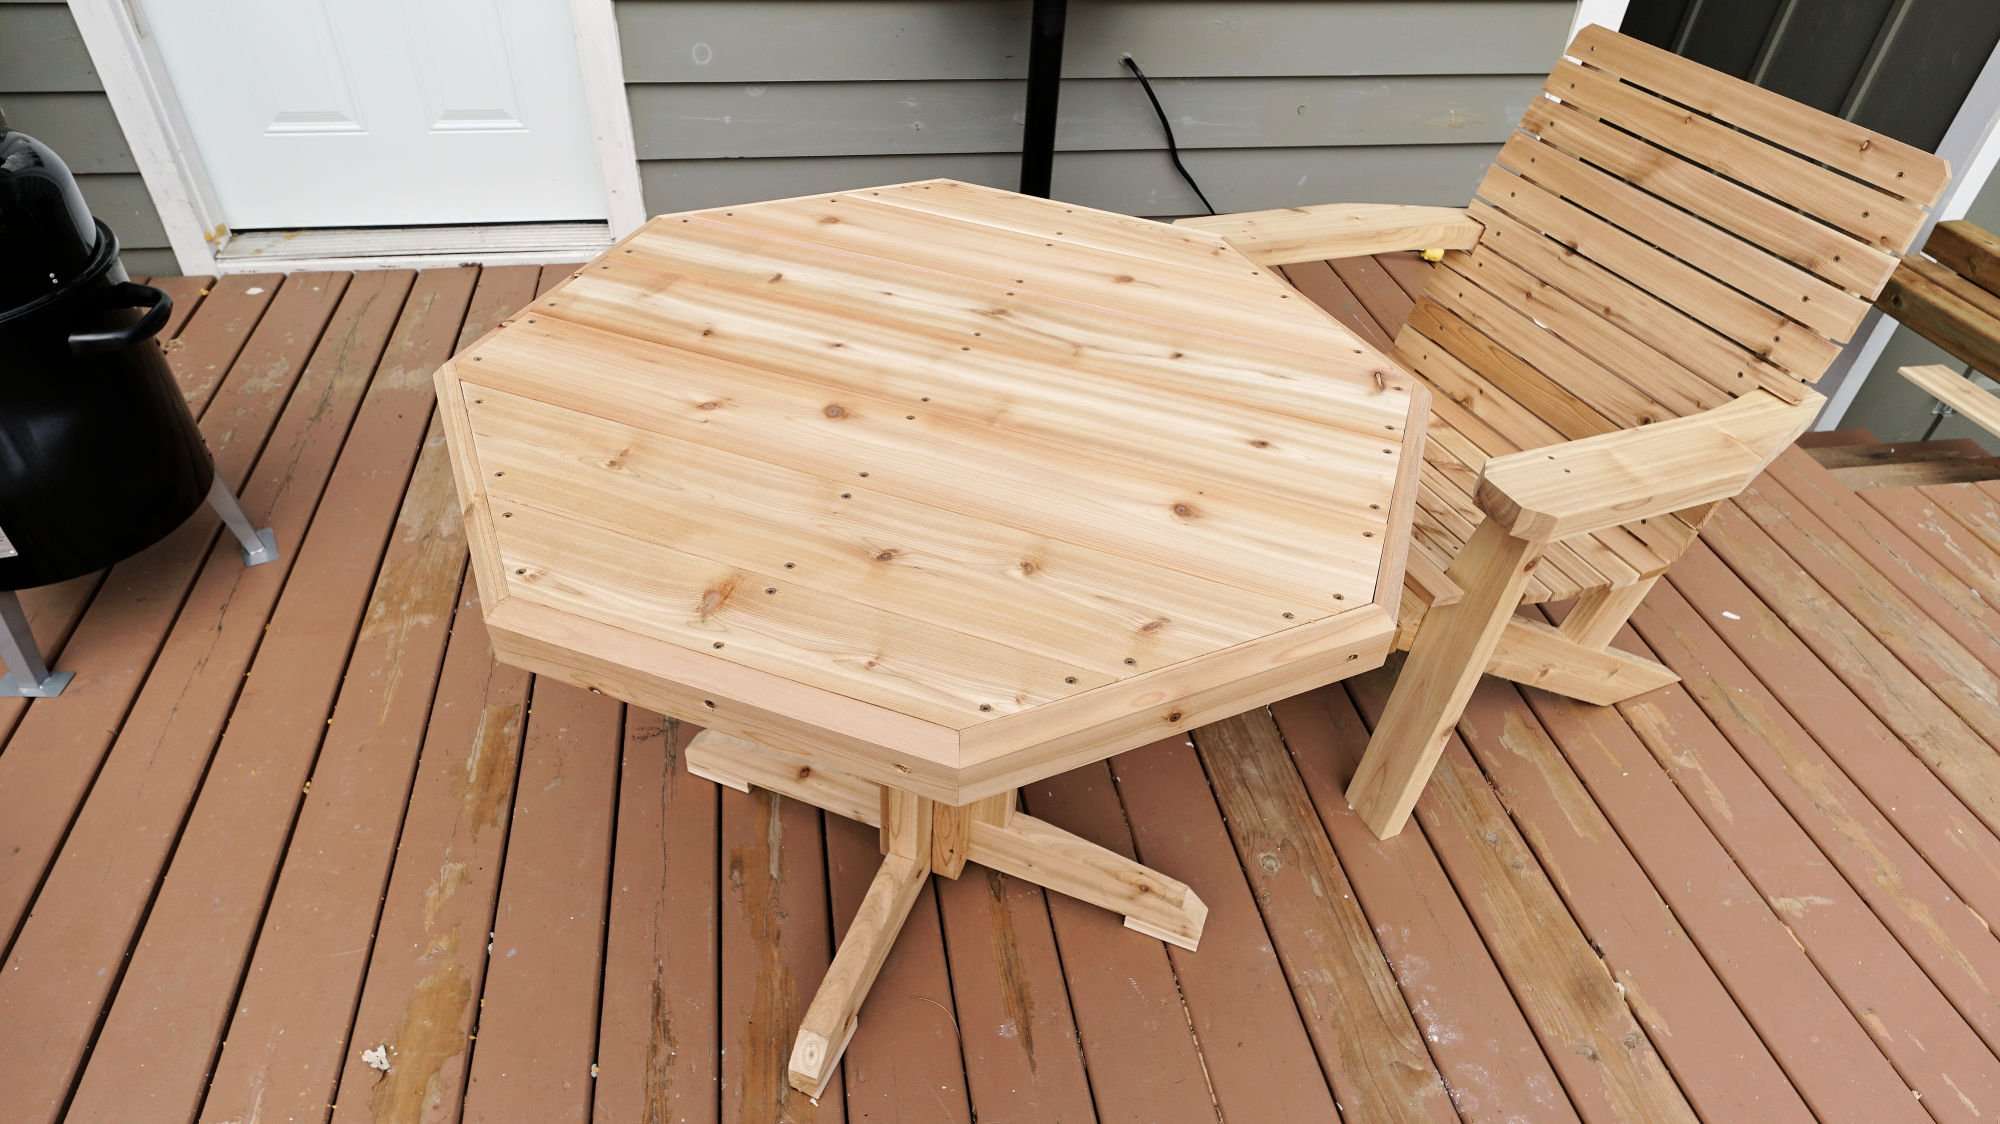 How To Make a Wooden Patio Table